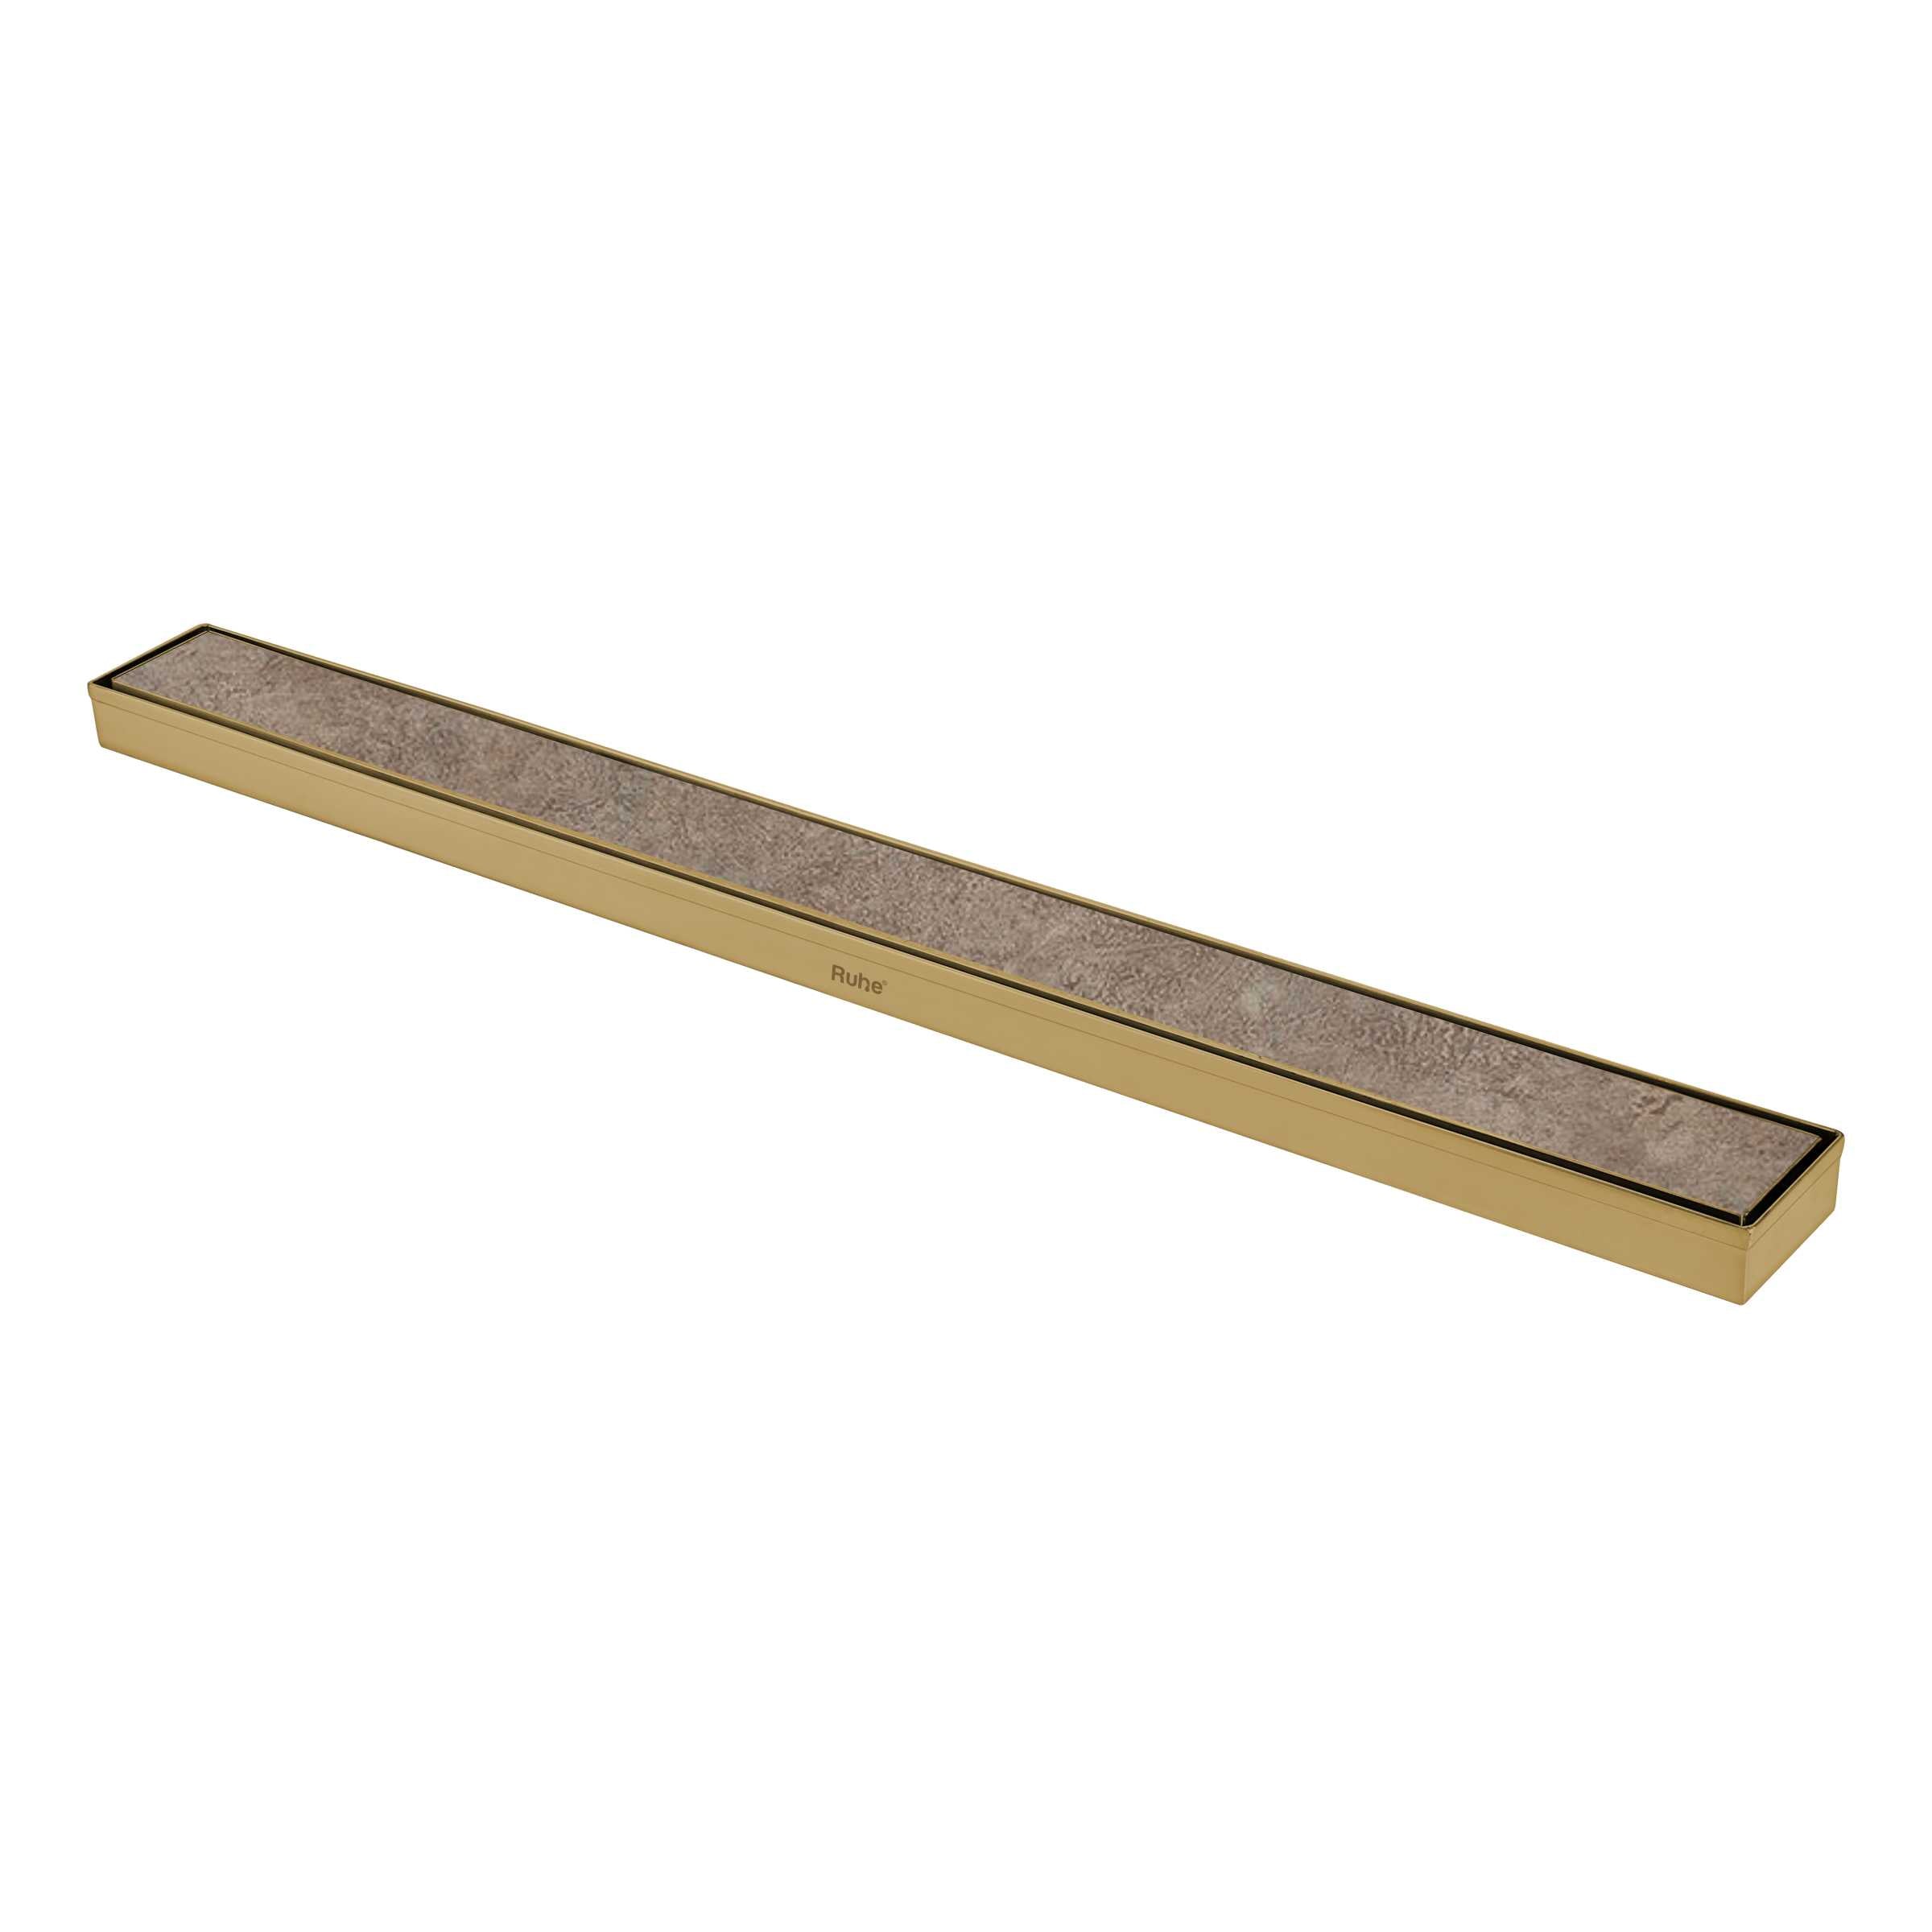 Marble Insert Shower Drain Channel (32 x 2 Inches) YELLOW GOLD